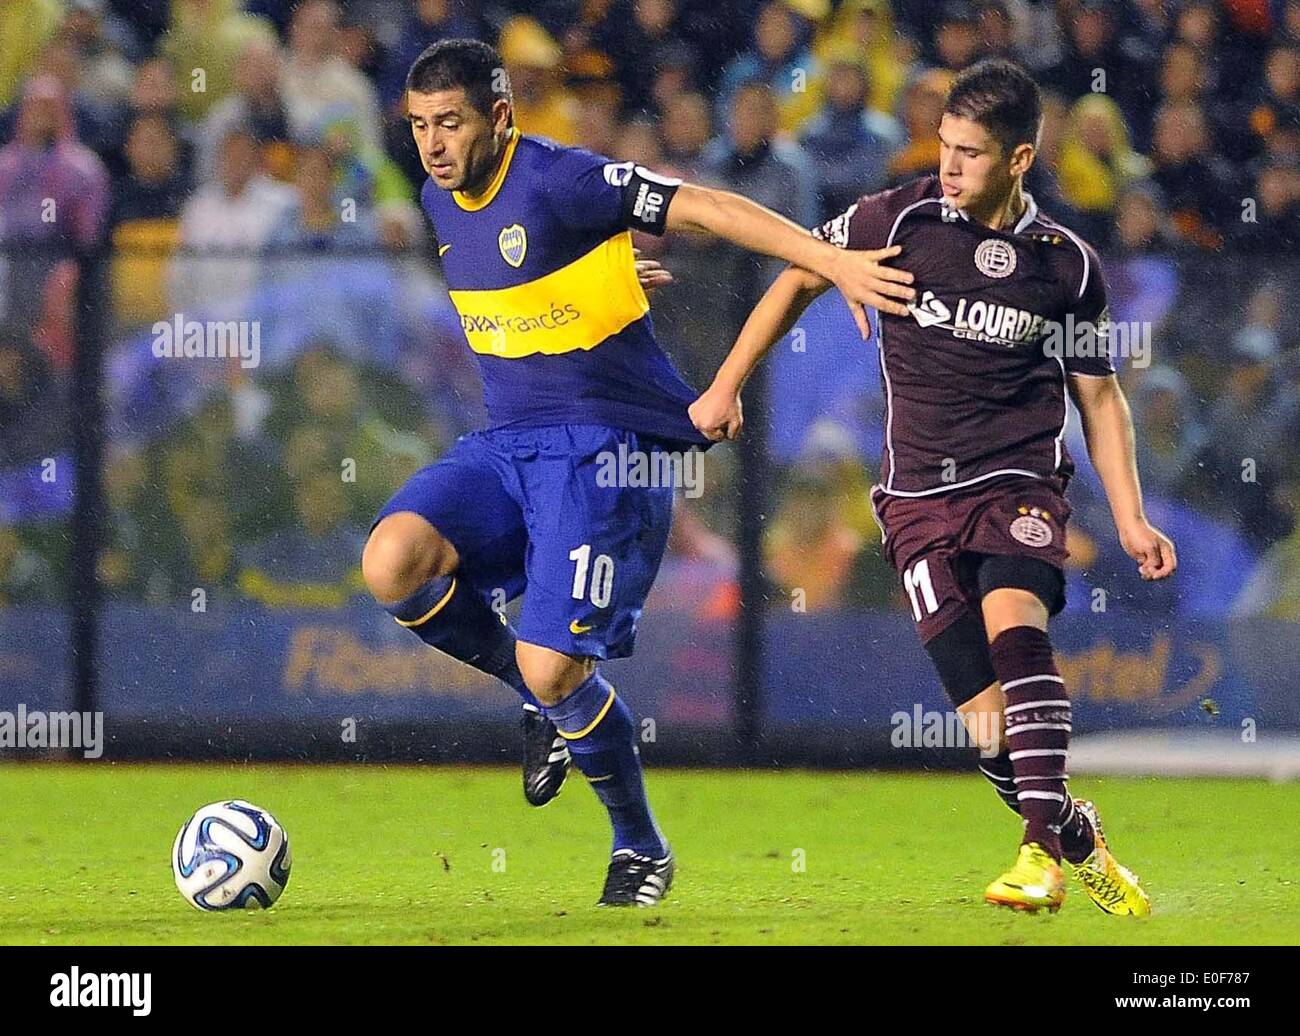 Buenos Aires, Argentina. 11th May, 2014. Juan Roman Riquelme (L) of Boca Juniors vies with Jorge Valdez of Lanus during the match of the Final Tournament 2014, in the Alberto J. Armando Stadium in Buenos Aires, capital of Argentina, on May 11, 2014. © Osvaldo Fanton/TELAM/Xinhua/Alamy Live News Stock Photo